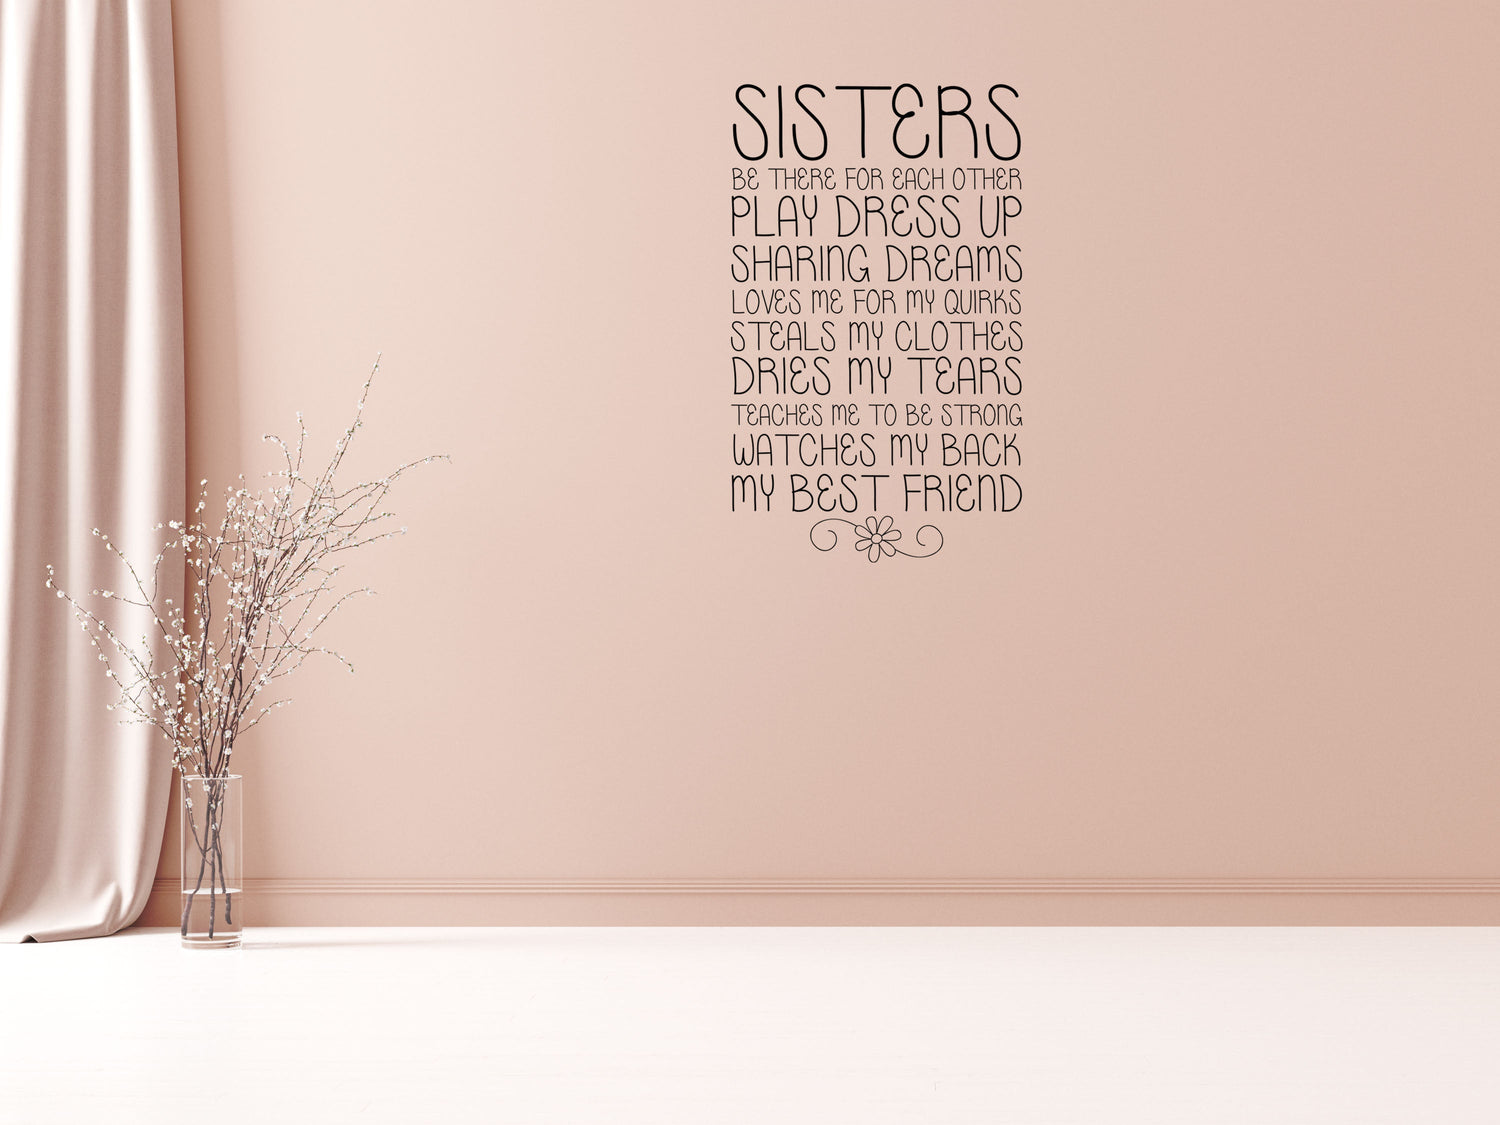 Sisters - Inspirational Wall Decals Vinyl Wall Decal Inspirational Wall Signs 